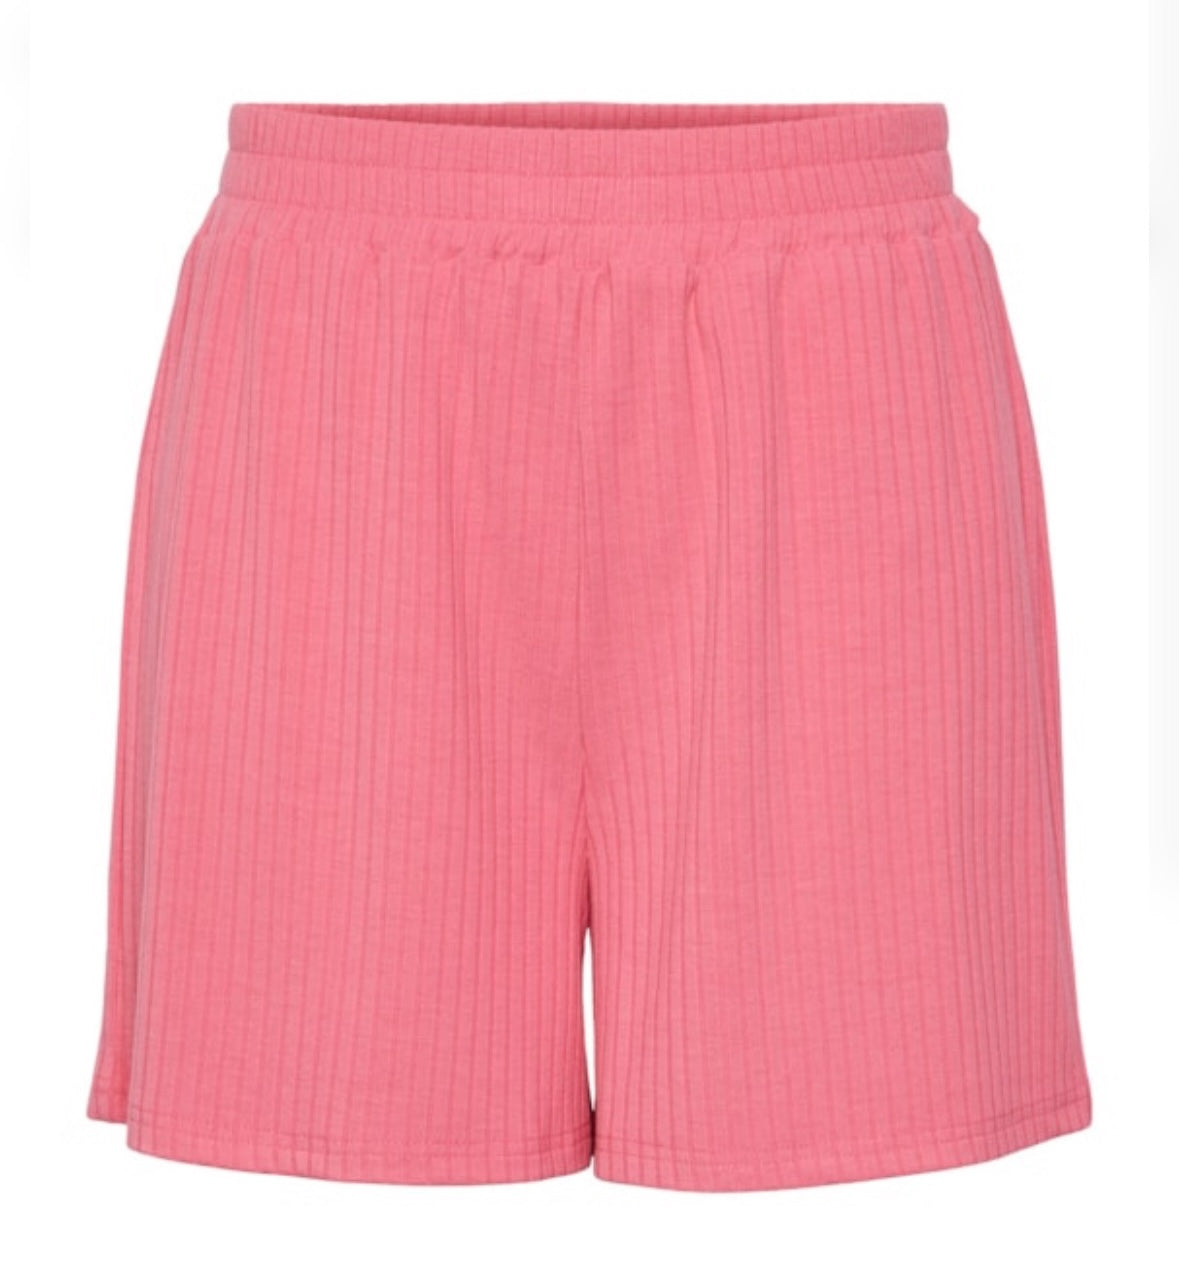 PIECES - KYLIE SHORTS - HOT PINK